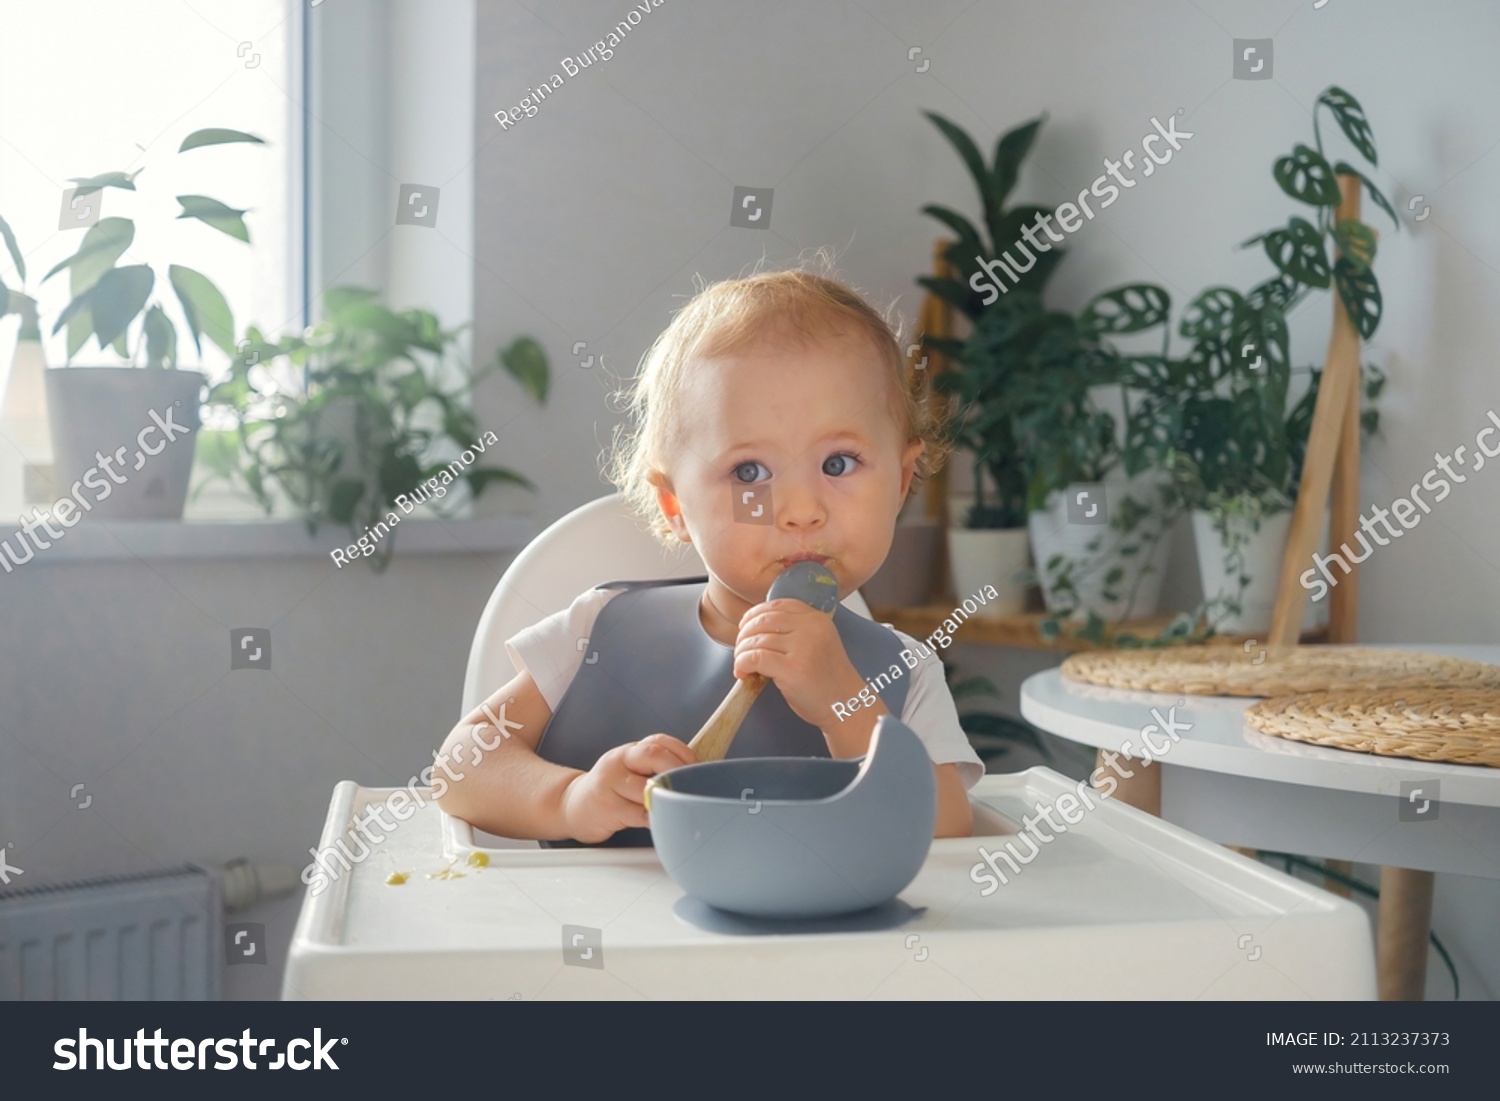 A baby making its first attempts to eat by itself. An infant sitting in highchair in dinning room, holding a spoon and eating #2113237373